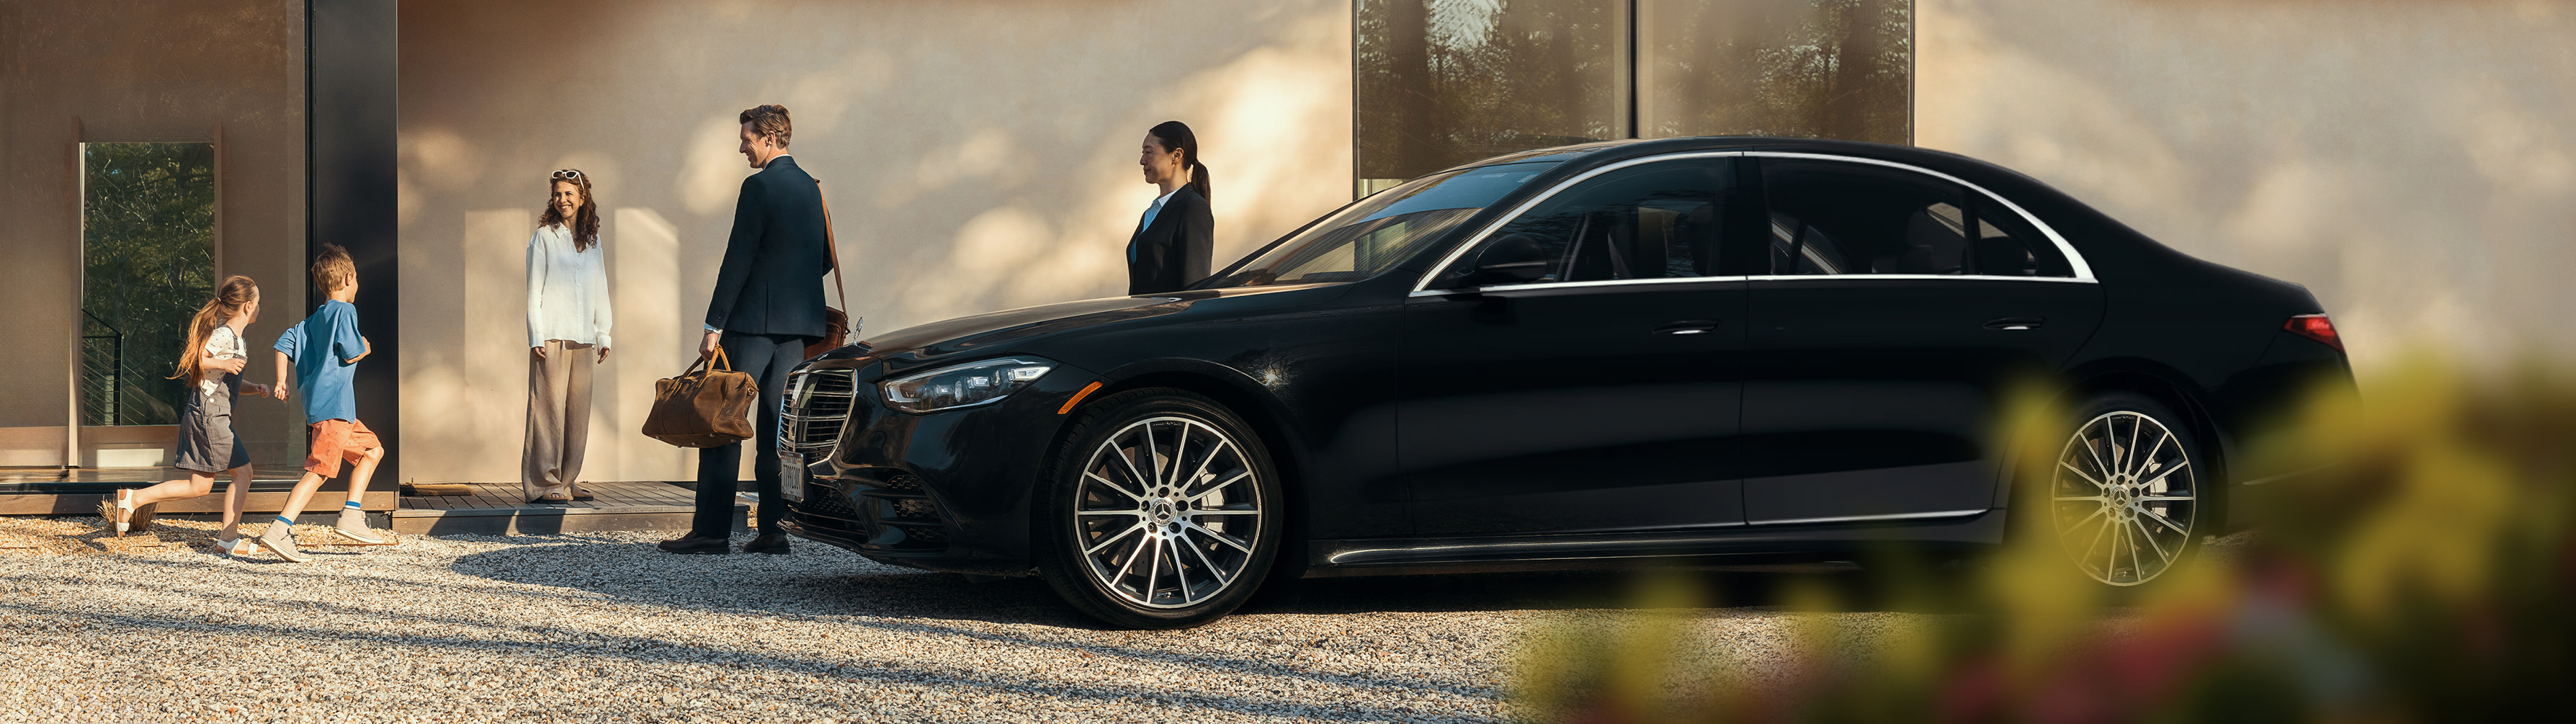 Chauffeur and family standing around a sleek, black vehicle.